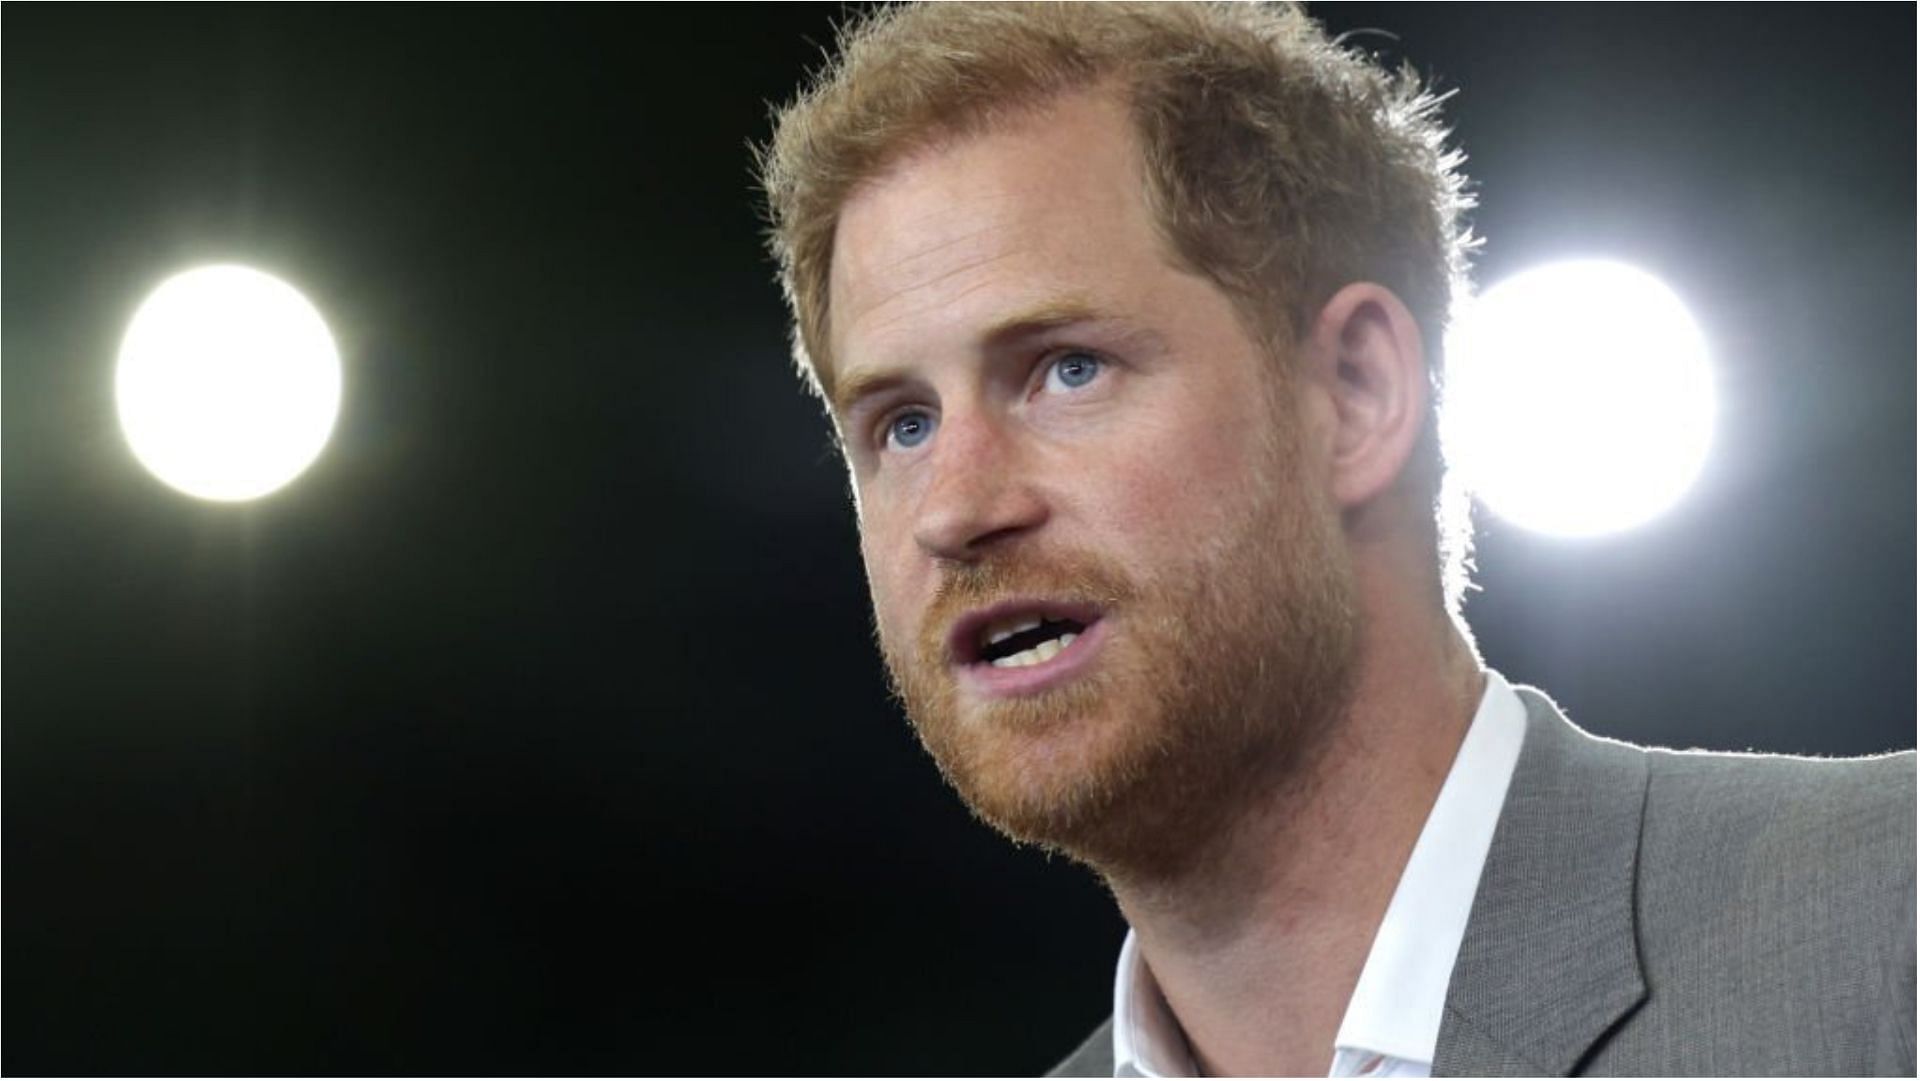 Prince Harry has made some money from the sale of his memoir Spare (Image via Chris Jackson/Getty Images)